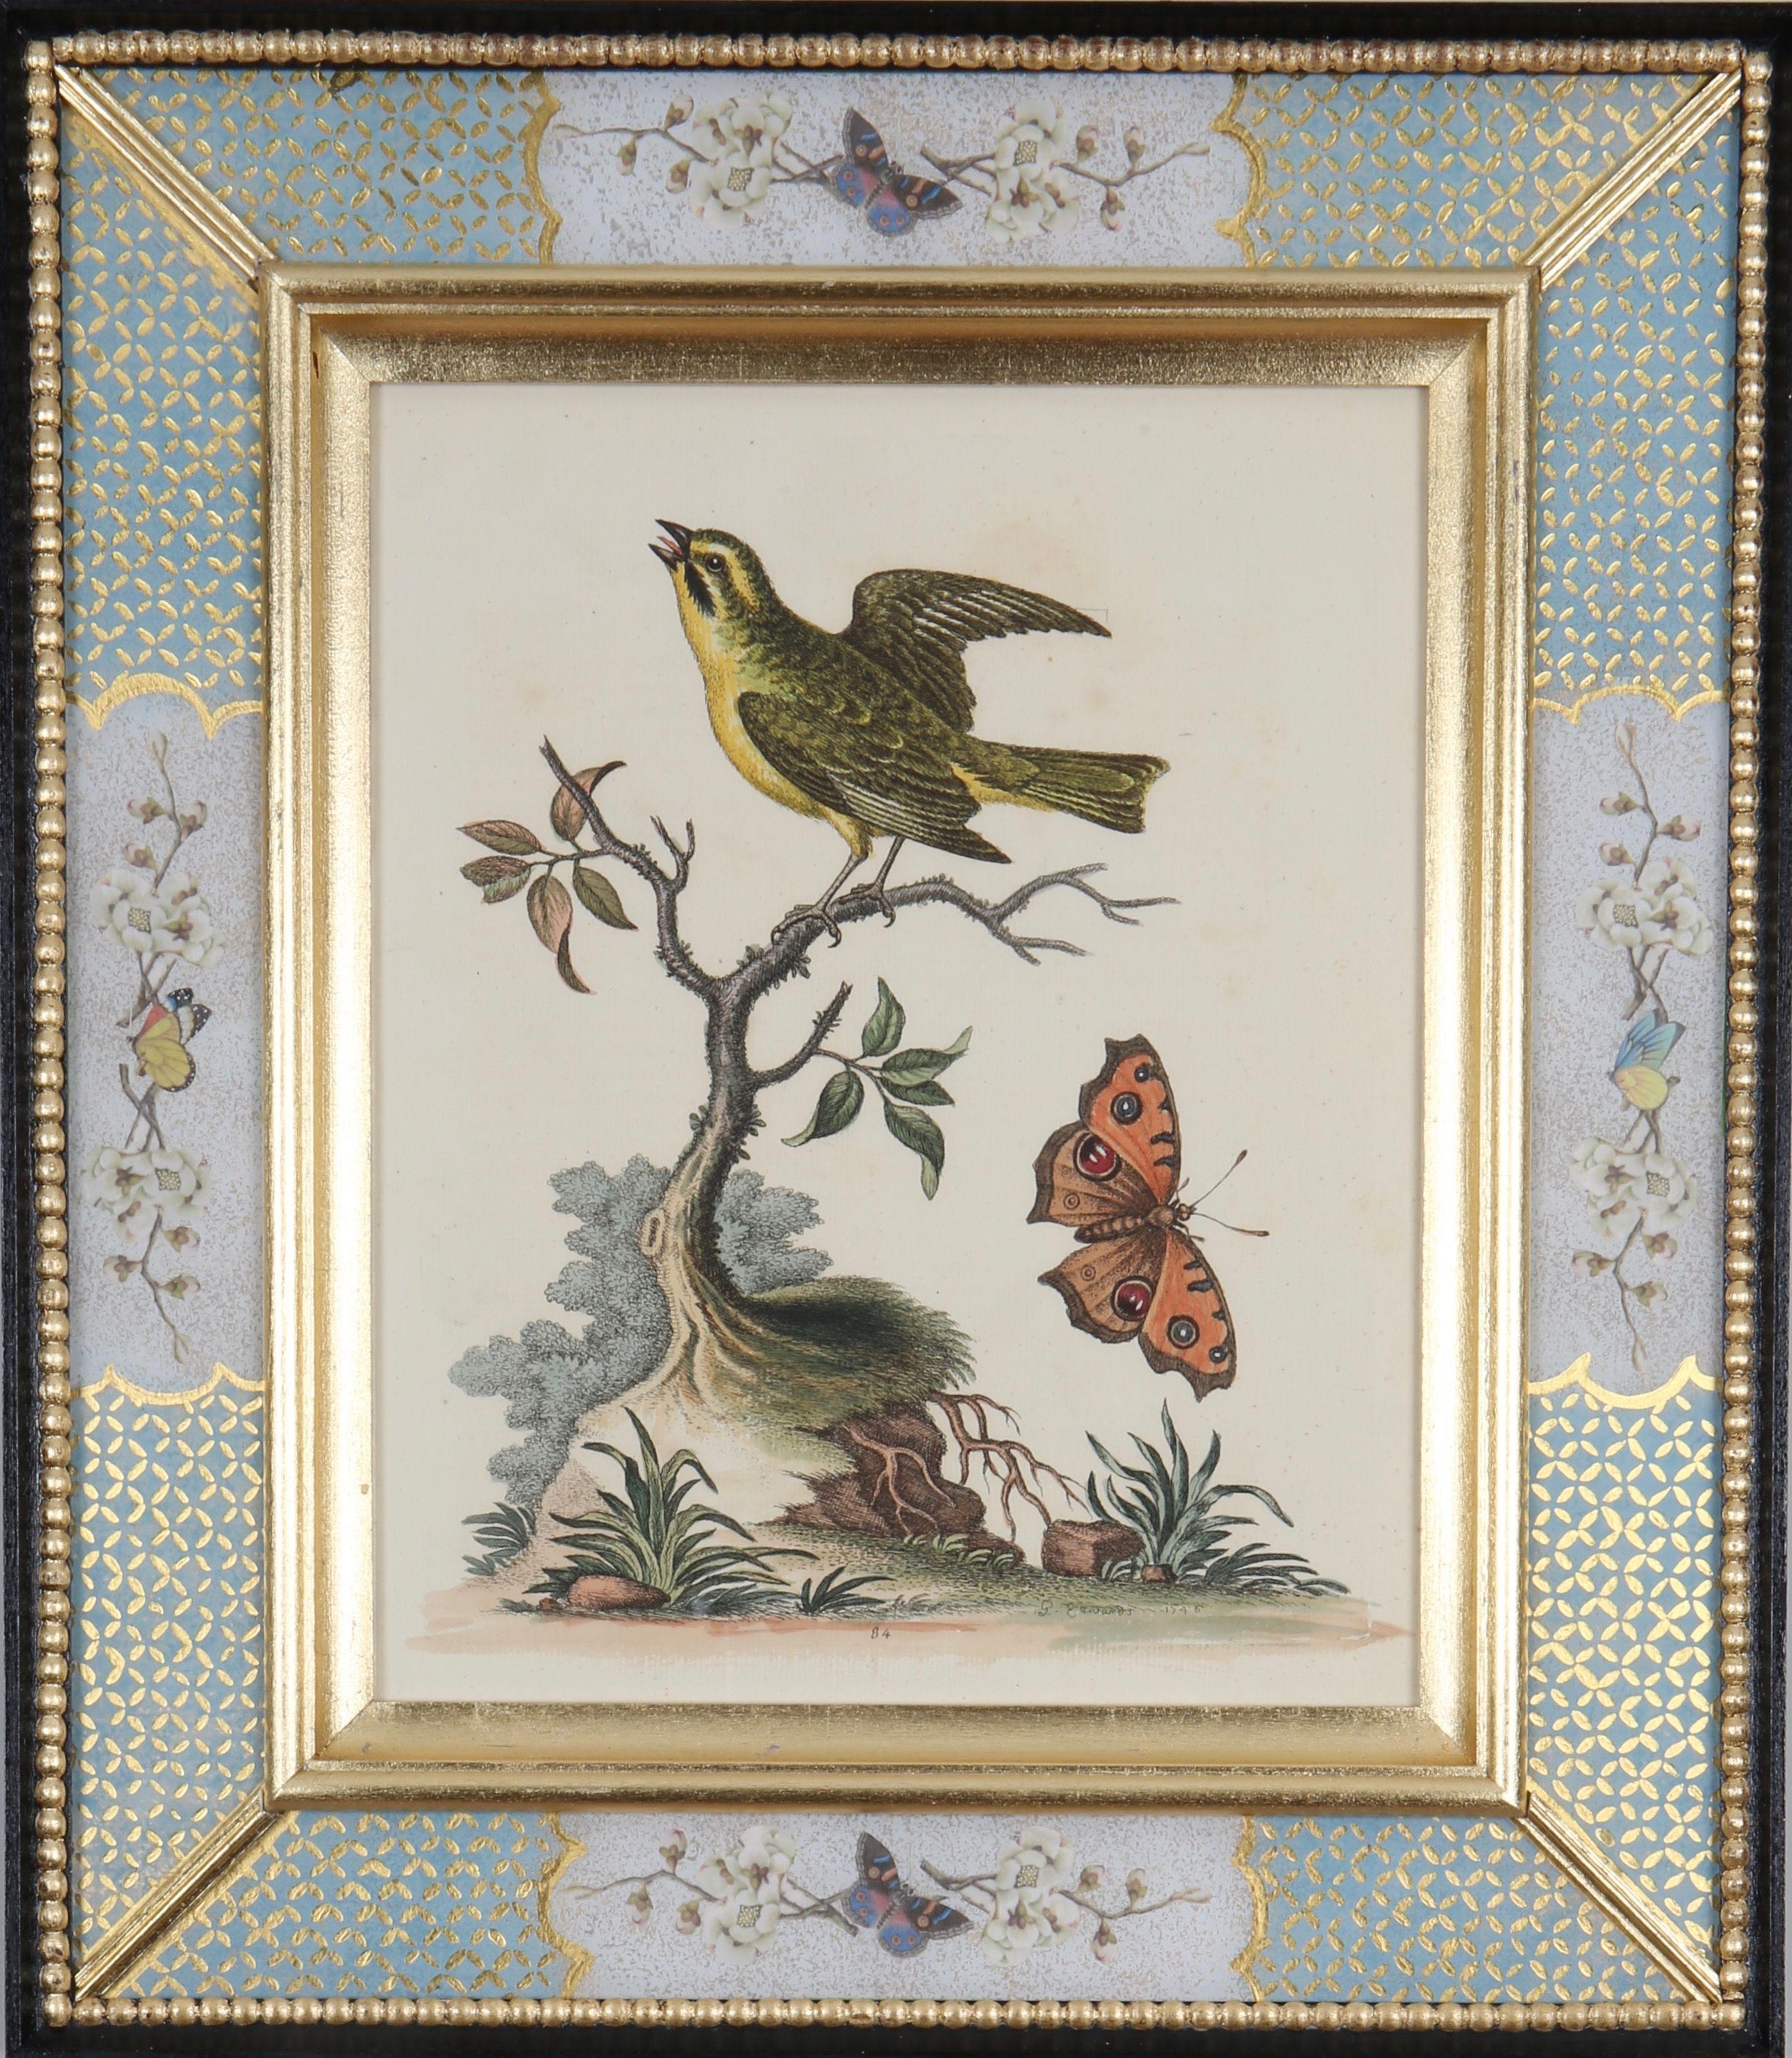 George Edwards: "A History of Uncommon Birds", 1749-1761.

A prominent English naturalist and ornithologist, George Edwards (1694 -1773) is best known for his work, ""A Natural History of Uncommon Birds"", which he published between 1743 and 1761